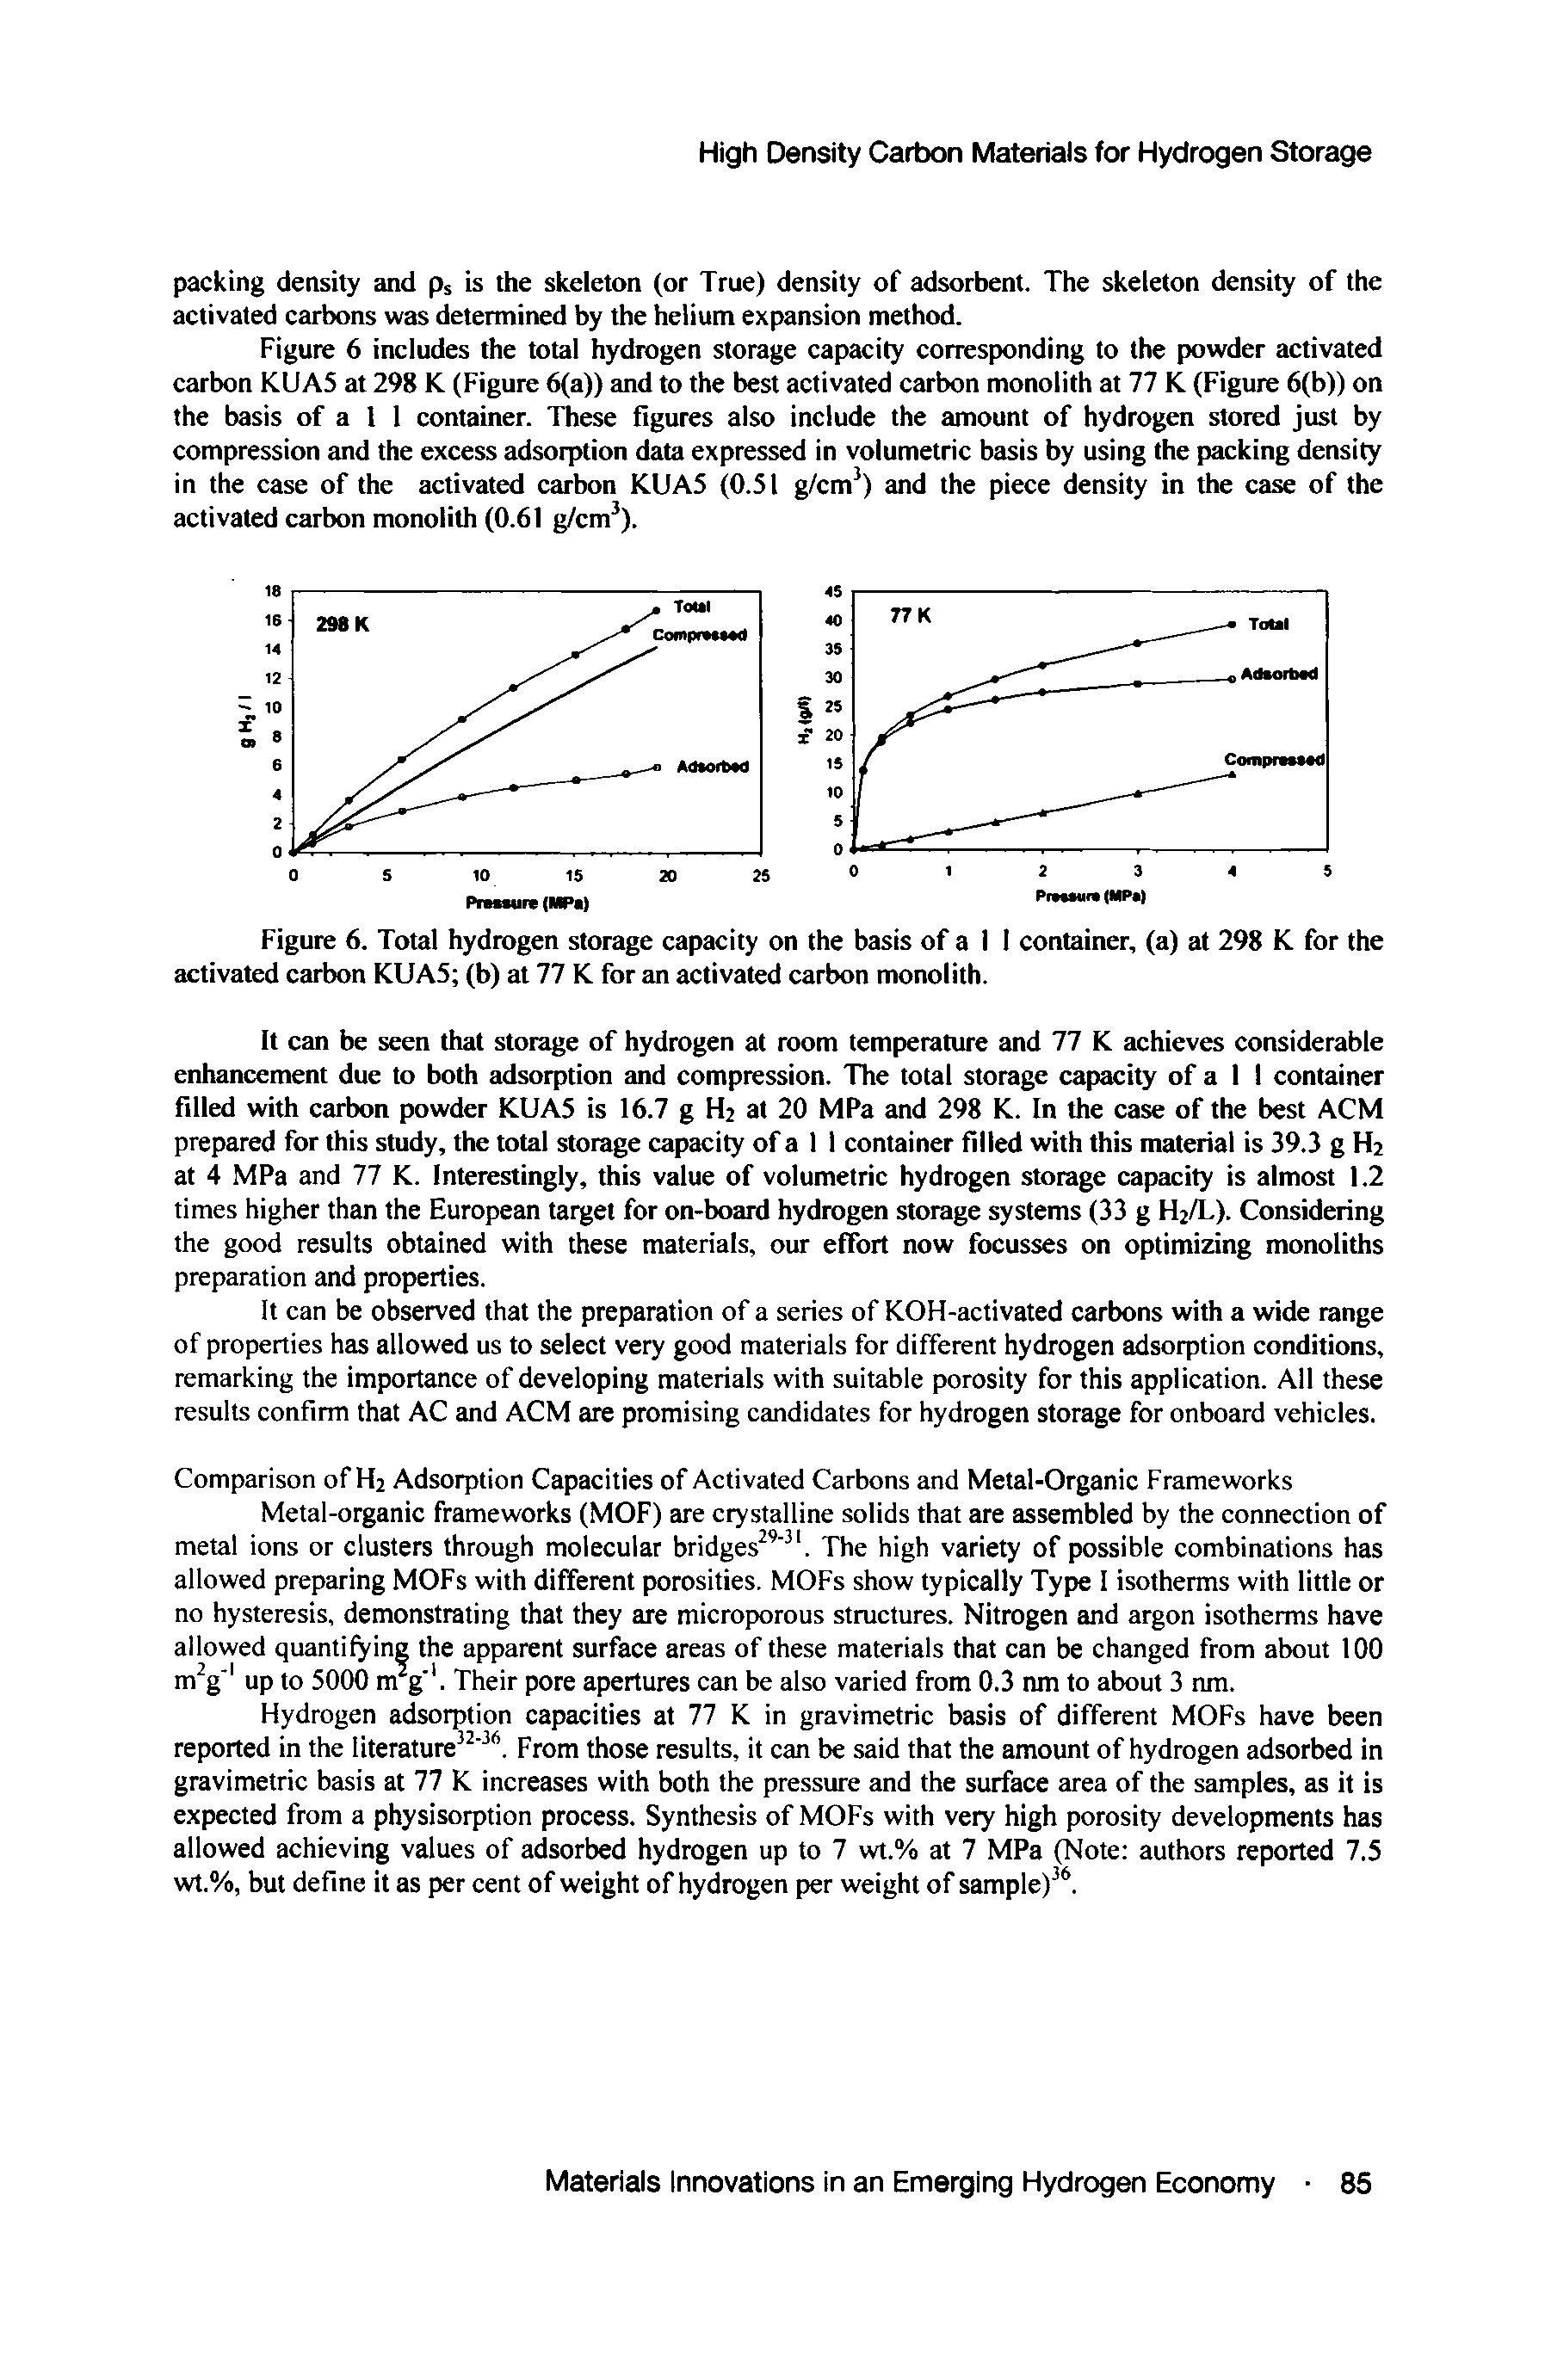 Figure 6. Total hydrogen storage capacity on the basis of a 1 I container, (a) at 298 K for the activated carbon KUA5 (b) at 77 K for an activated carbon monolith.